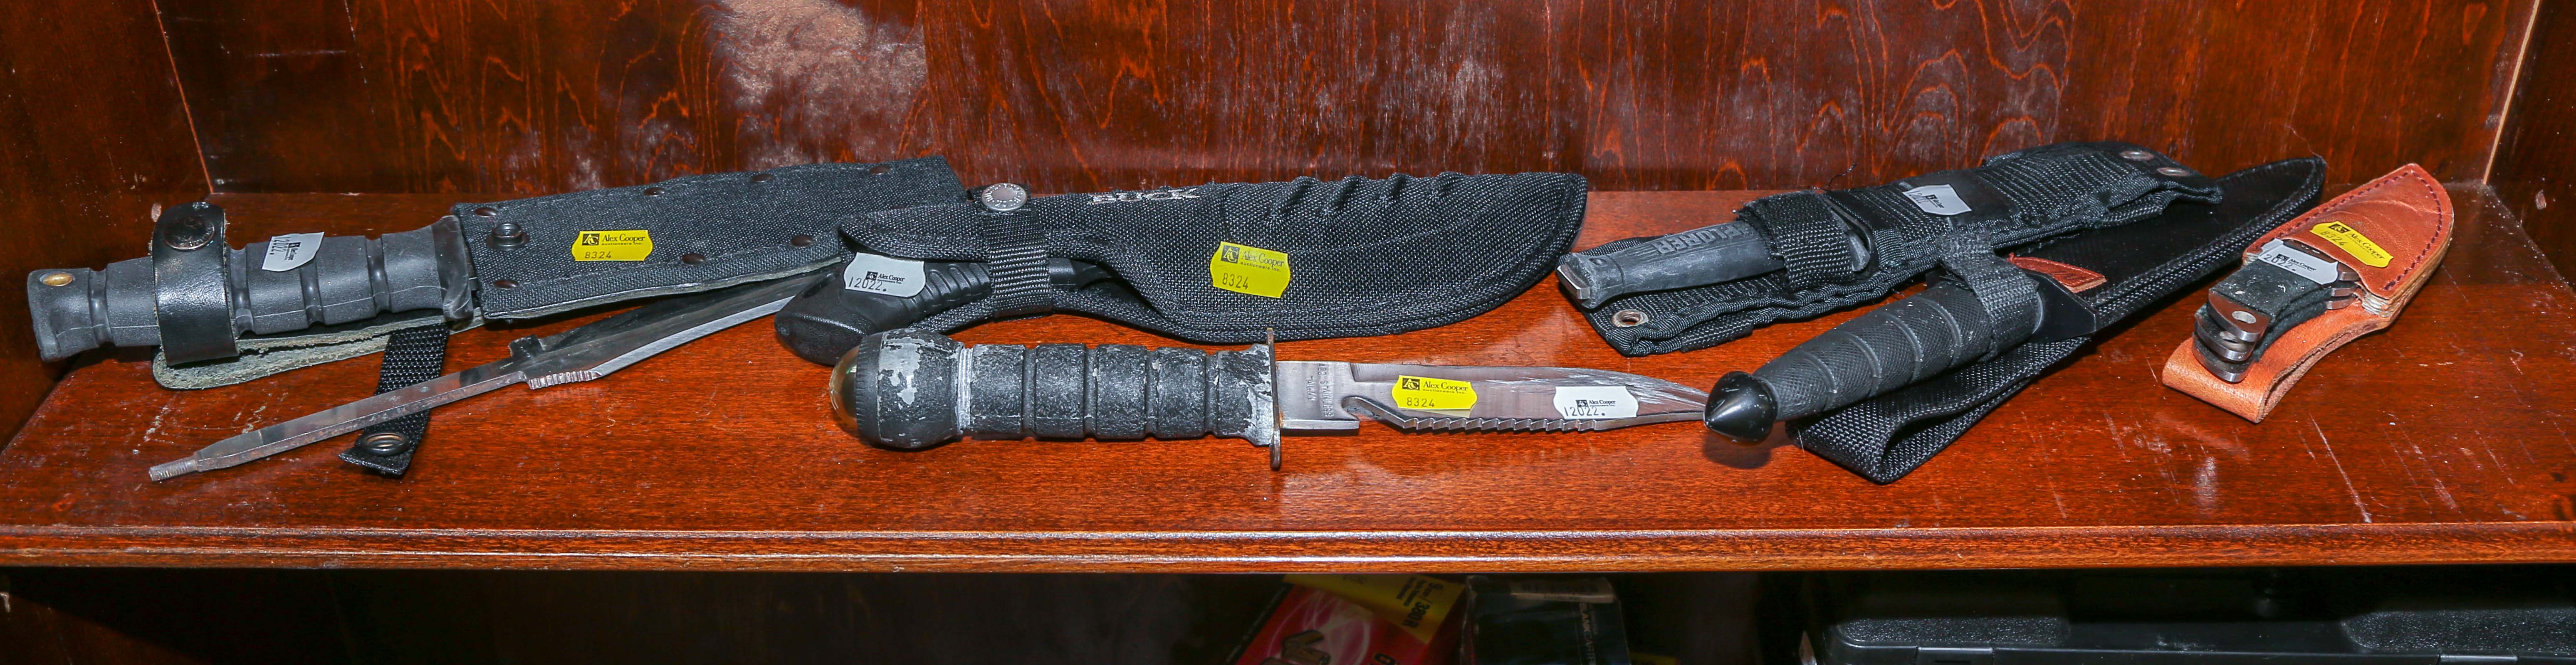 ASSORTMENT OF FIXED BLADE KNIVES